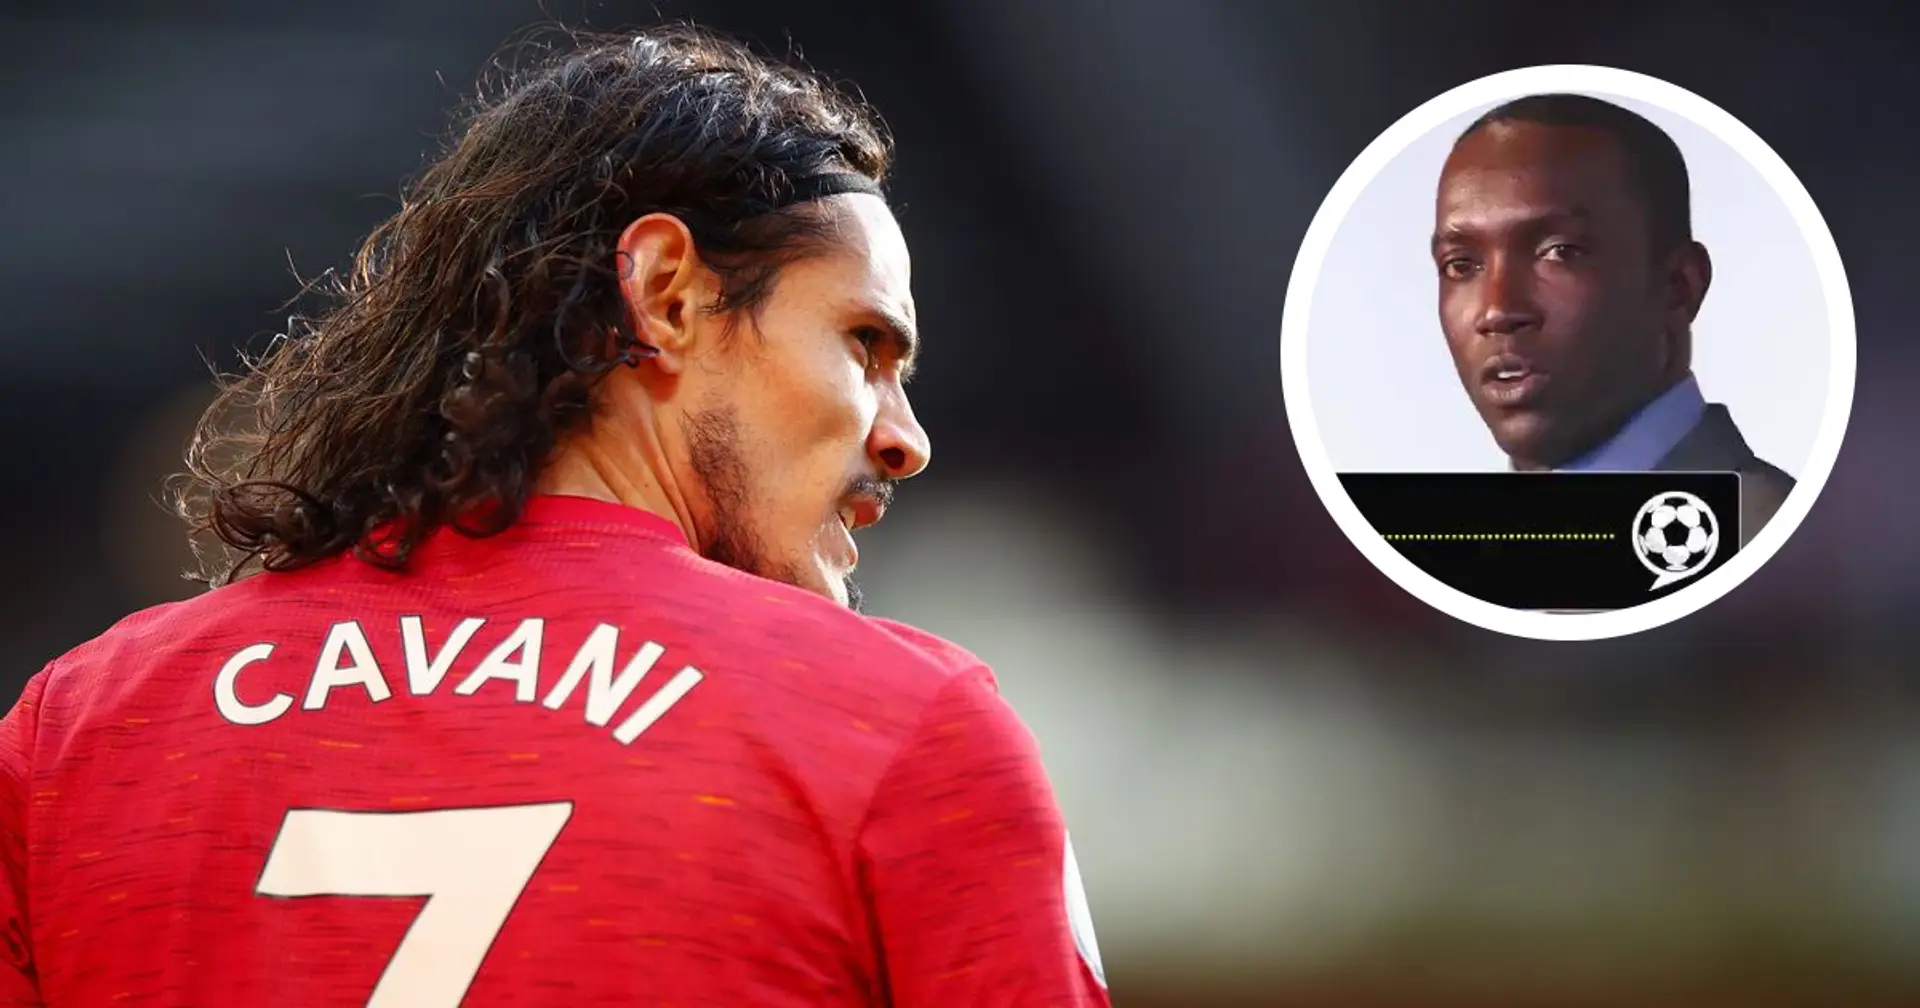 Dwight Yorke fears Cavani deal could hamper Man United's chances of signing a 'younger no.9'